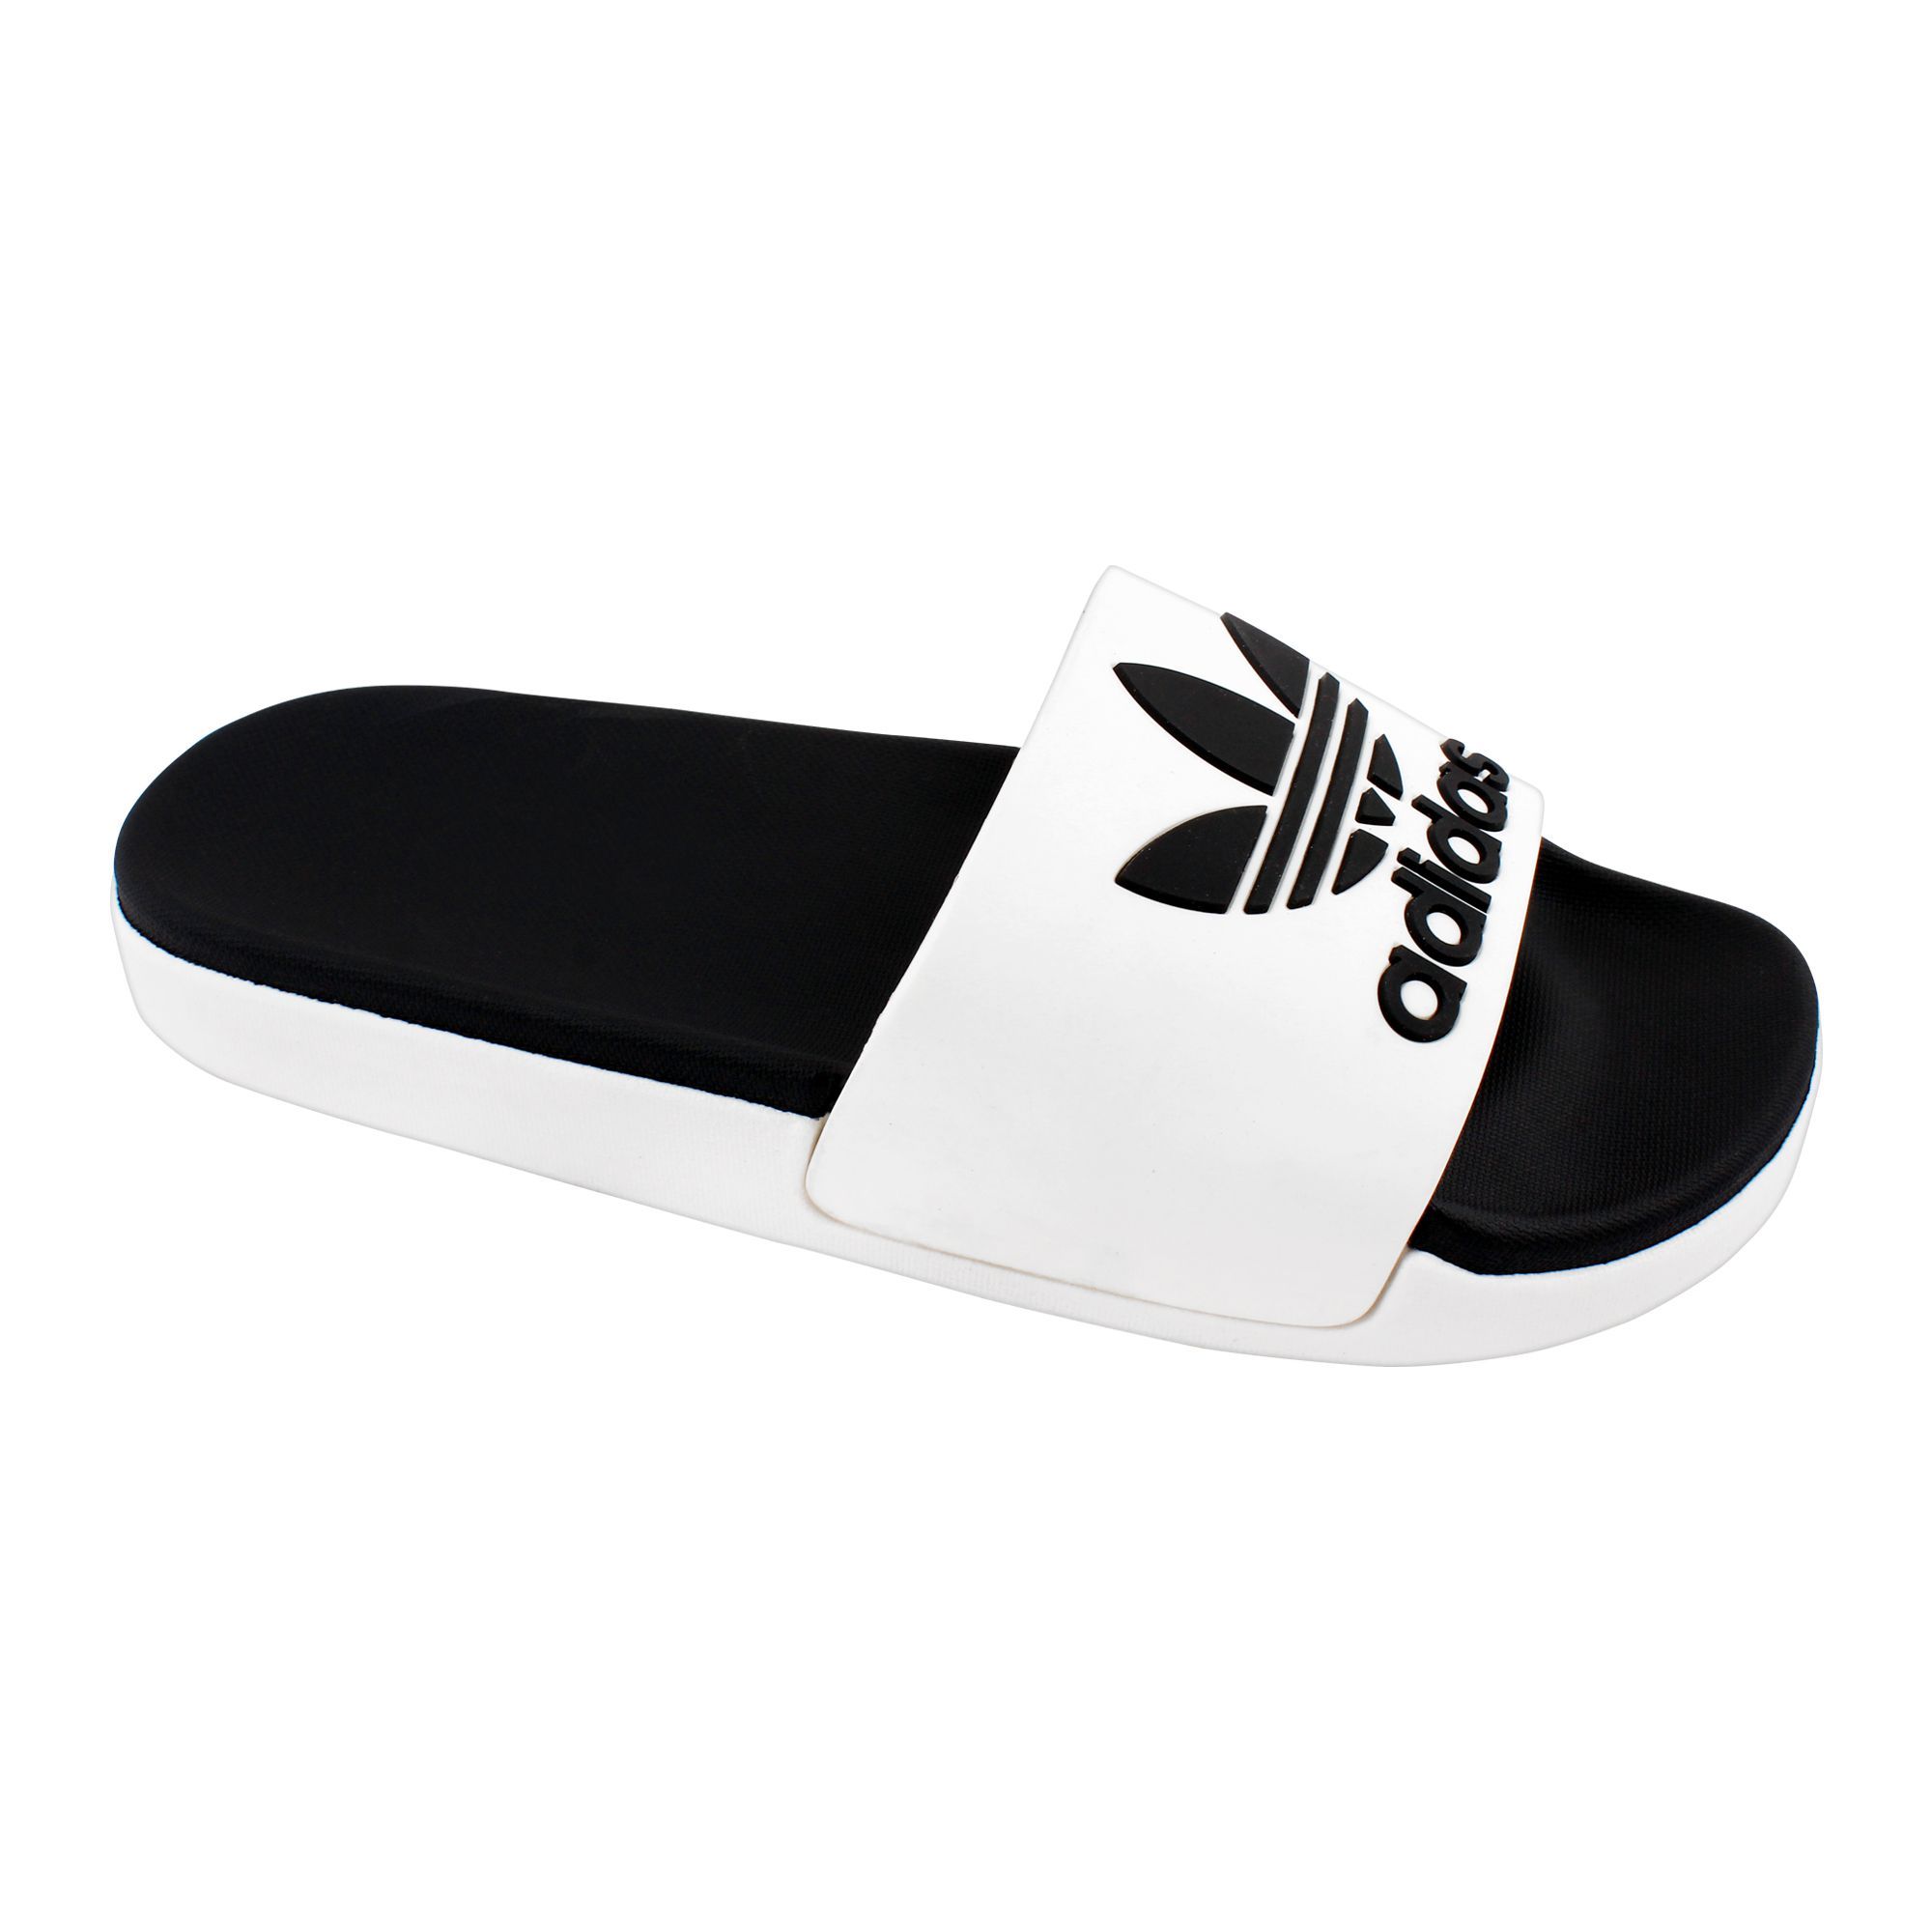 Buy ADIDAS MEN EQ21 (GW6728) Online in Pakistan On Clicky.pk at Lowest  Prices | Cash On Delivery All Over the Pakistan